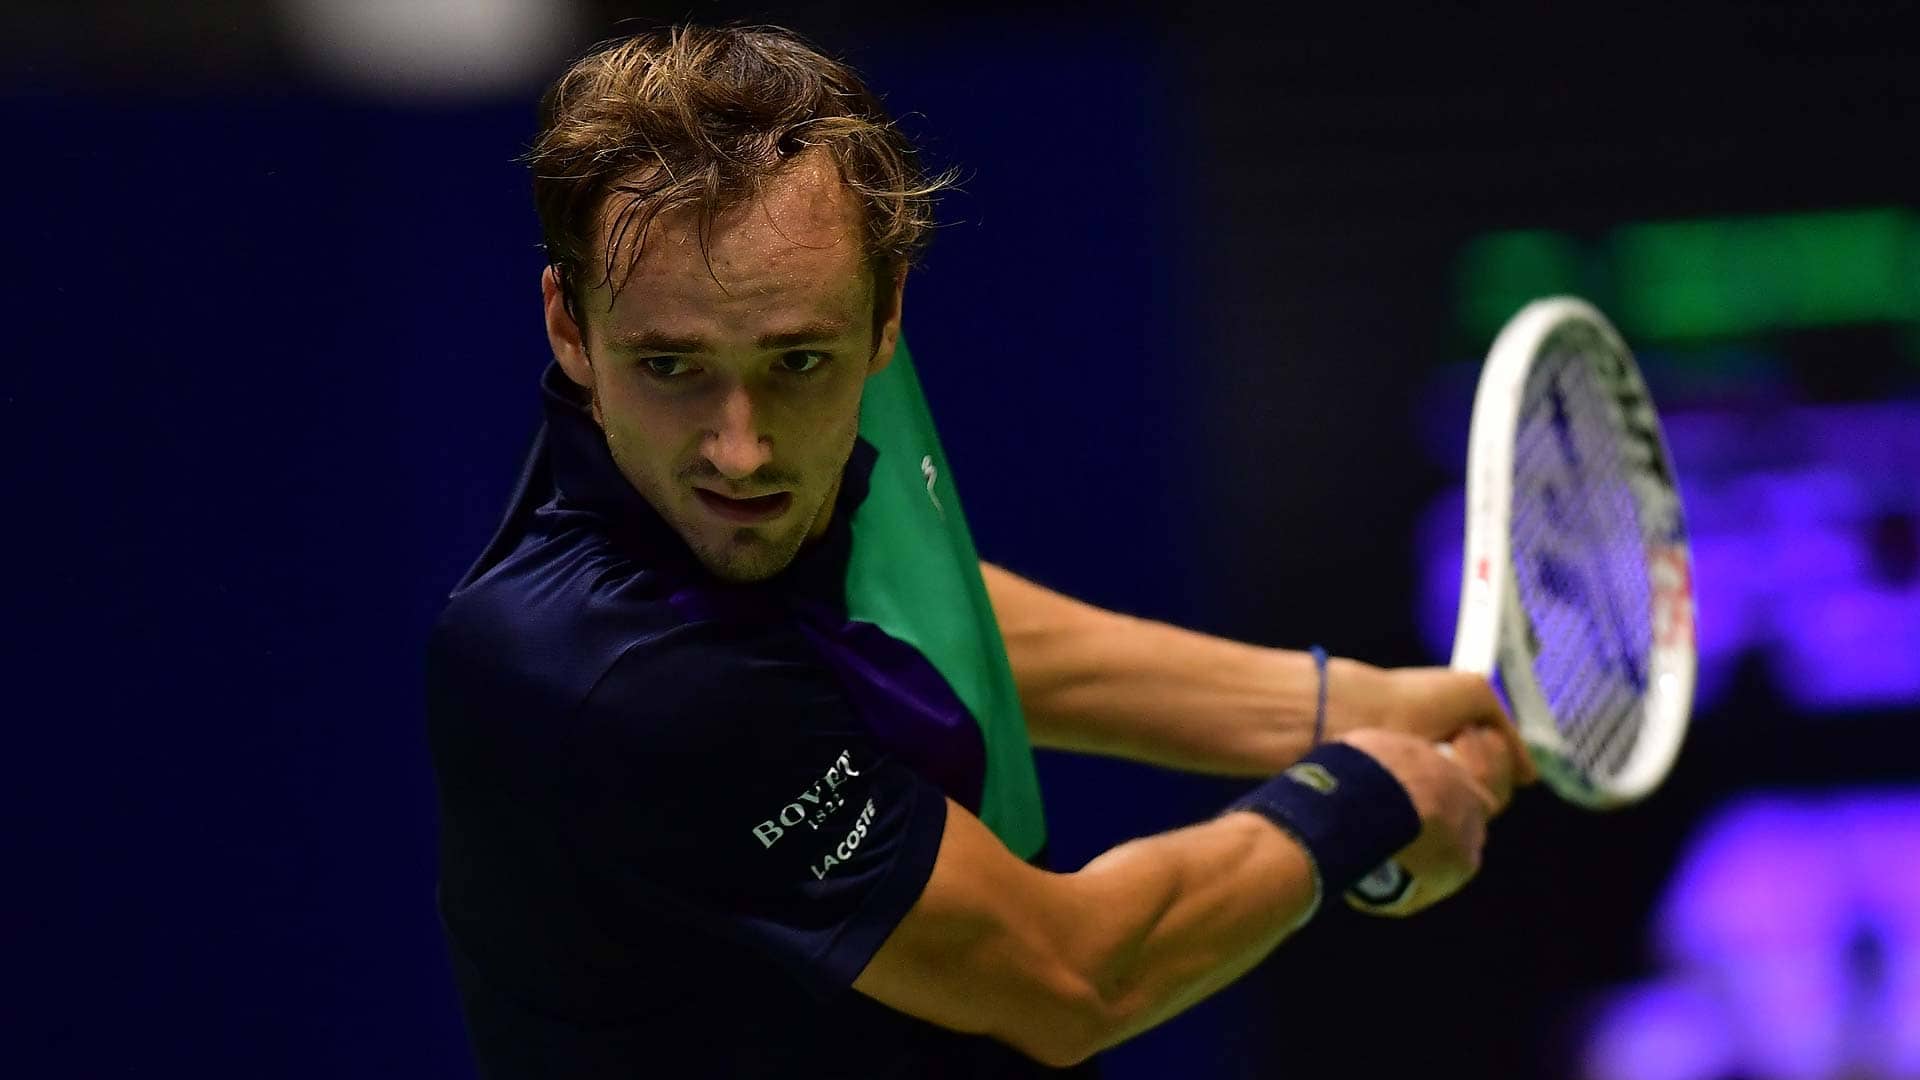 Daniil Medvedev defeated Albert Ramos-Vinolas in straight sets in his first-round match at the Astana Open.